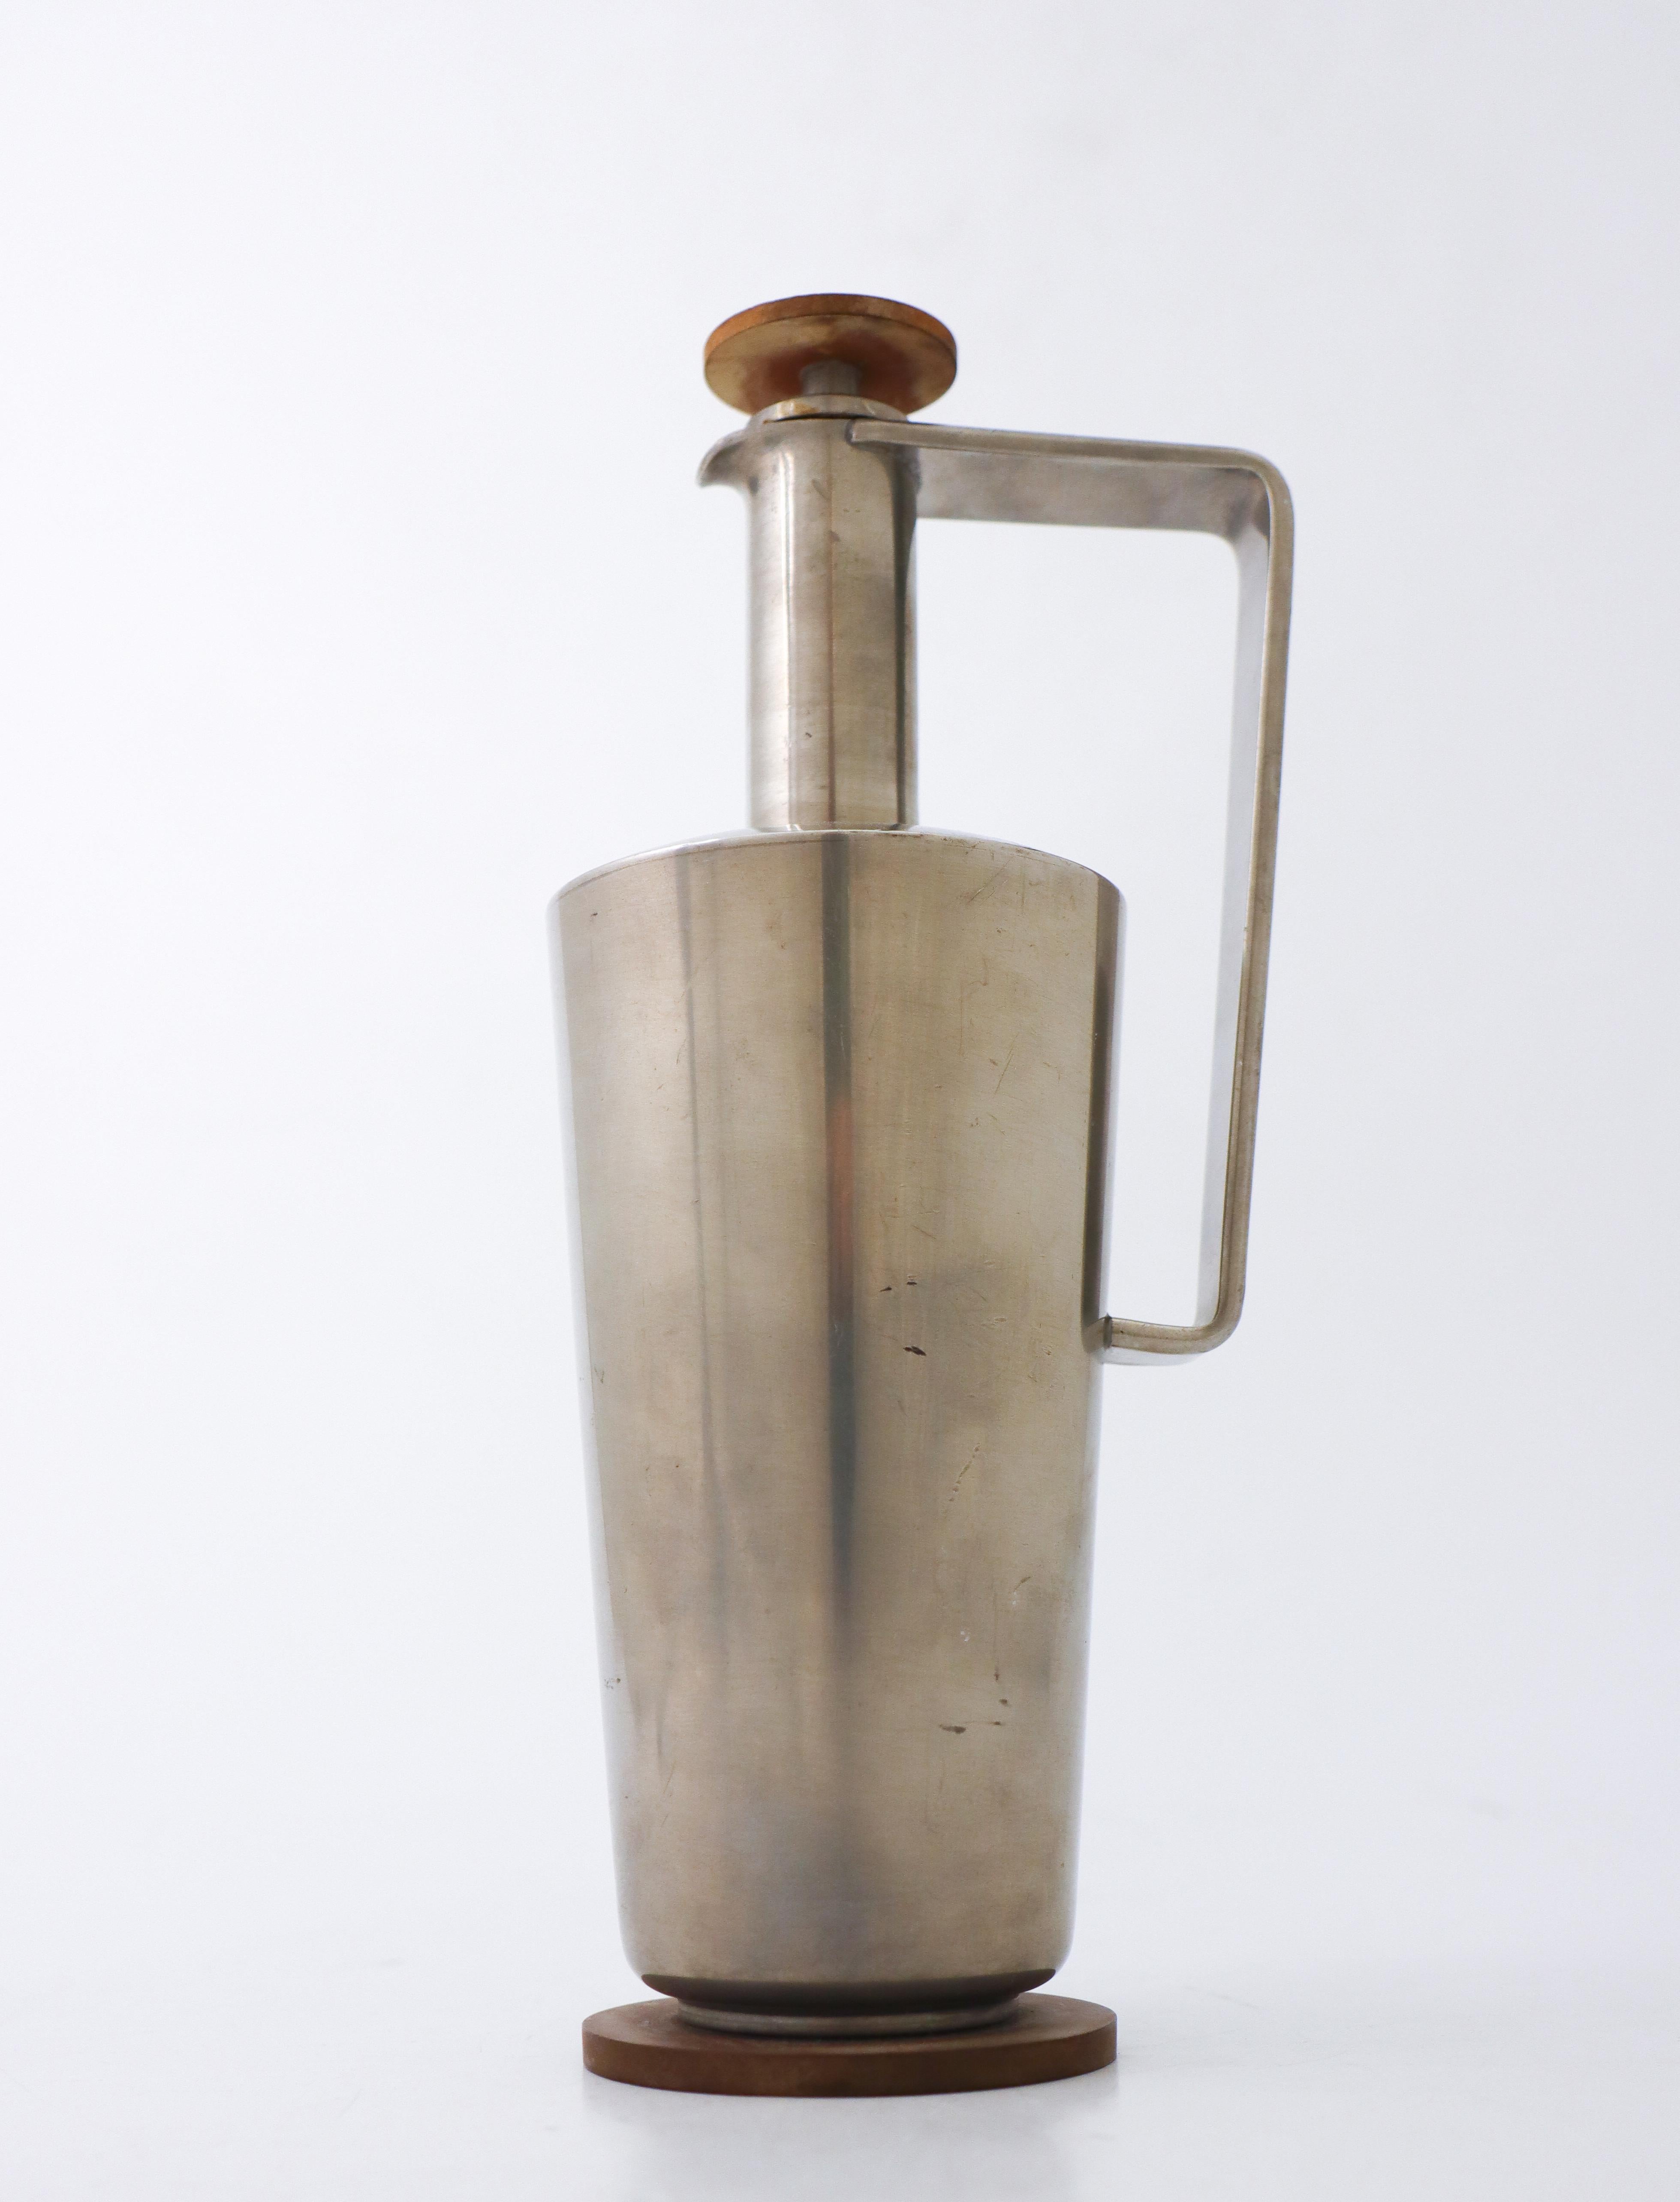 A beautiful bottle in metal in lovely art deco style designed by Carl-Einar Borgström at Ystad Metal in Sweden 1943. The stopper and the base is made of bakelite. It is 24 cm (9.6